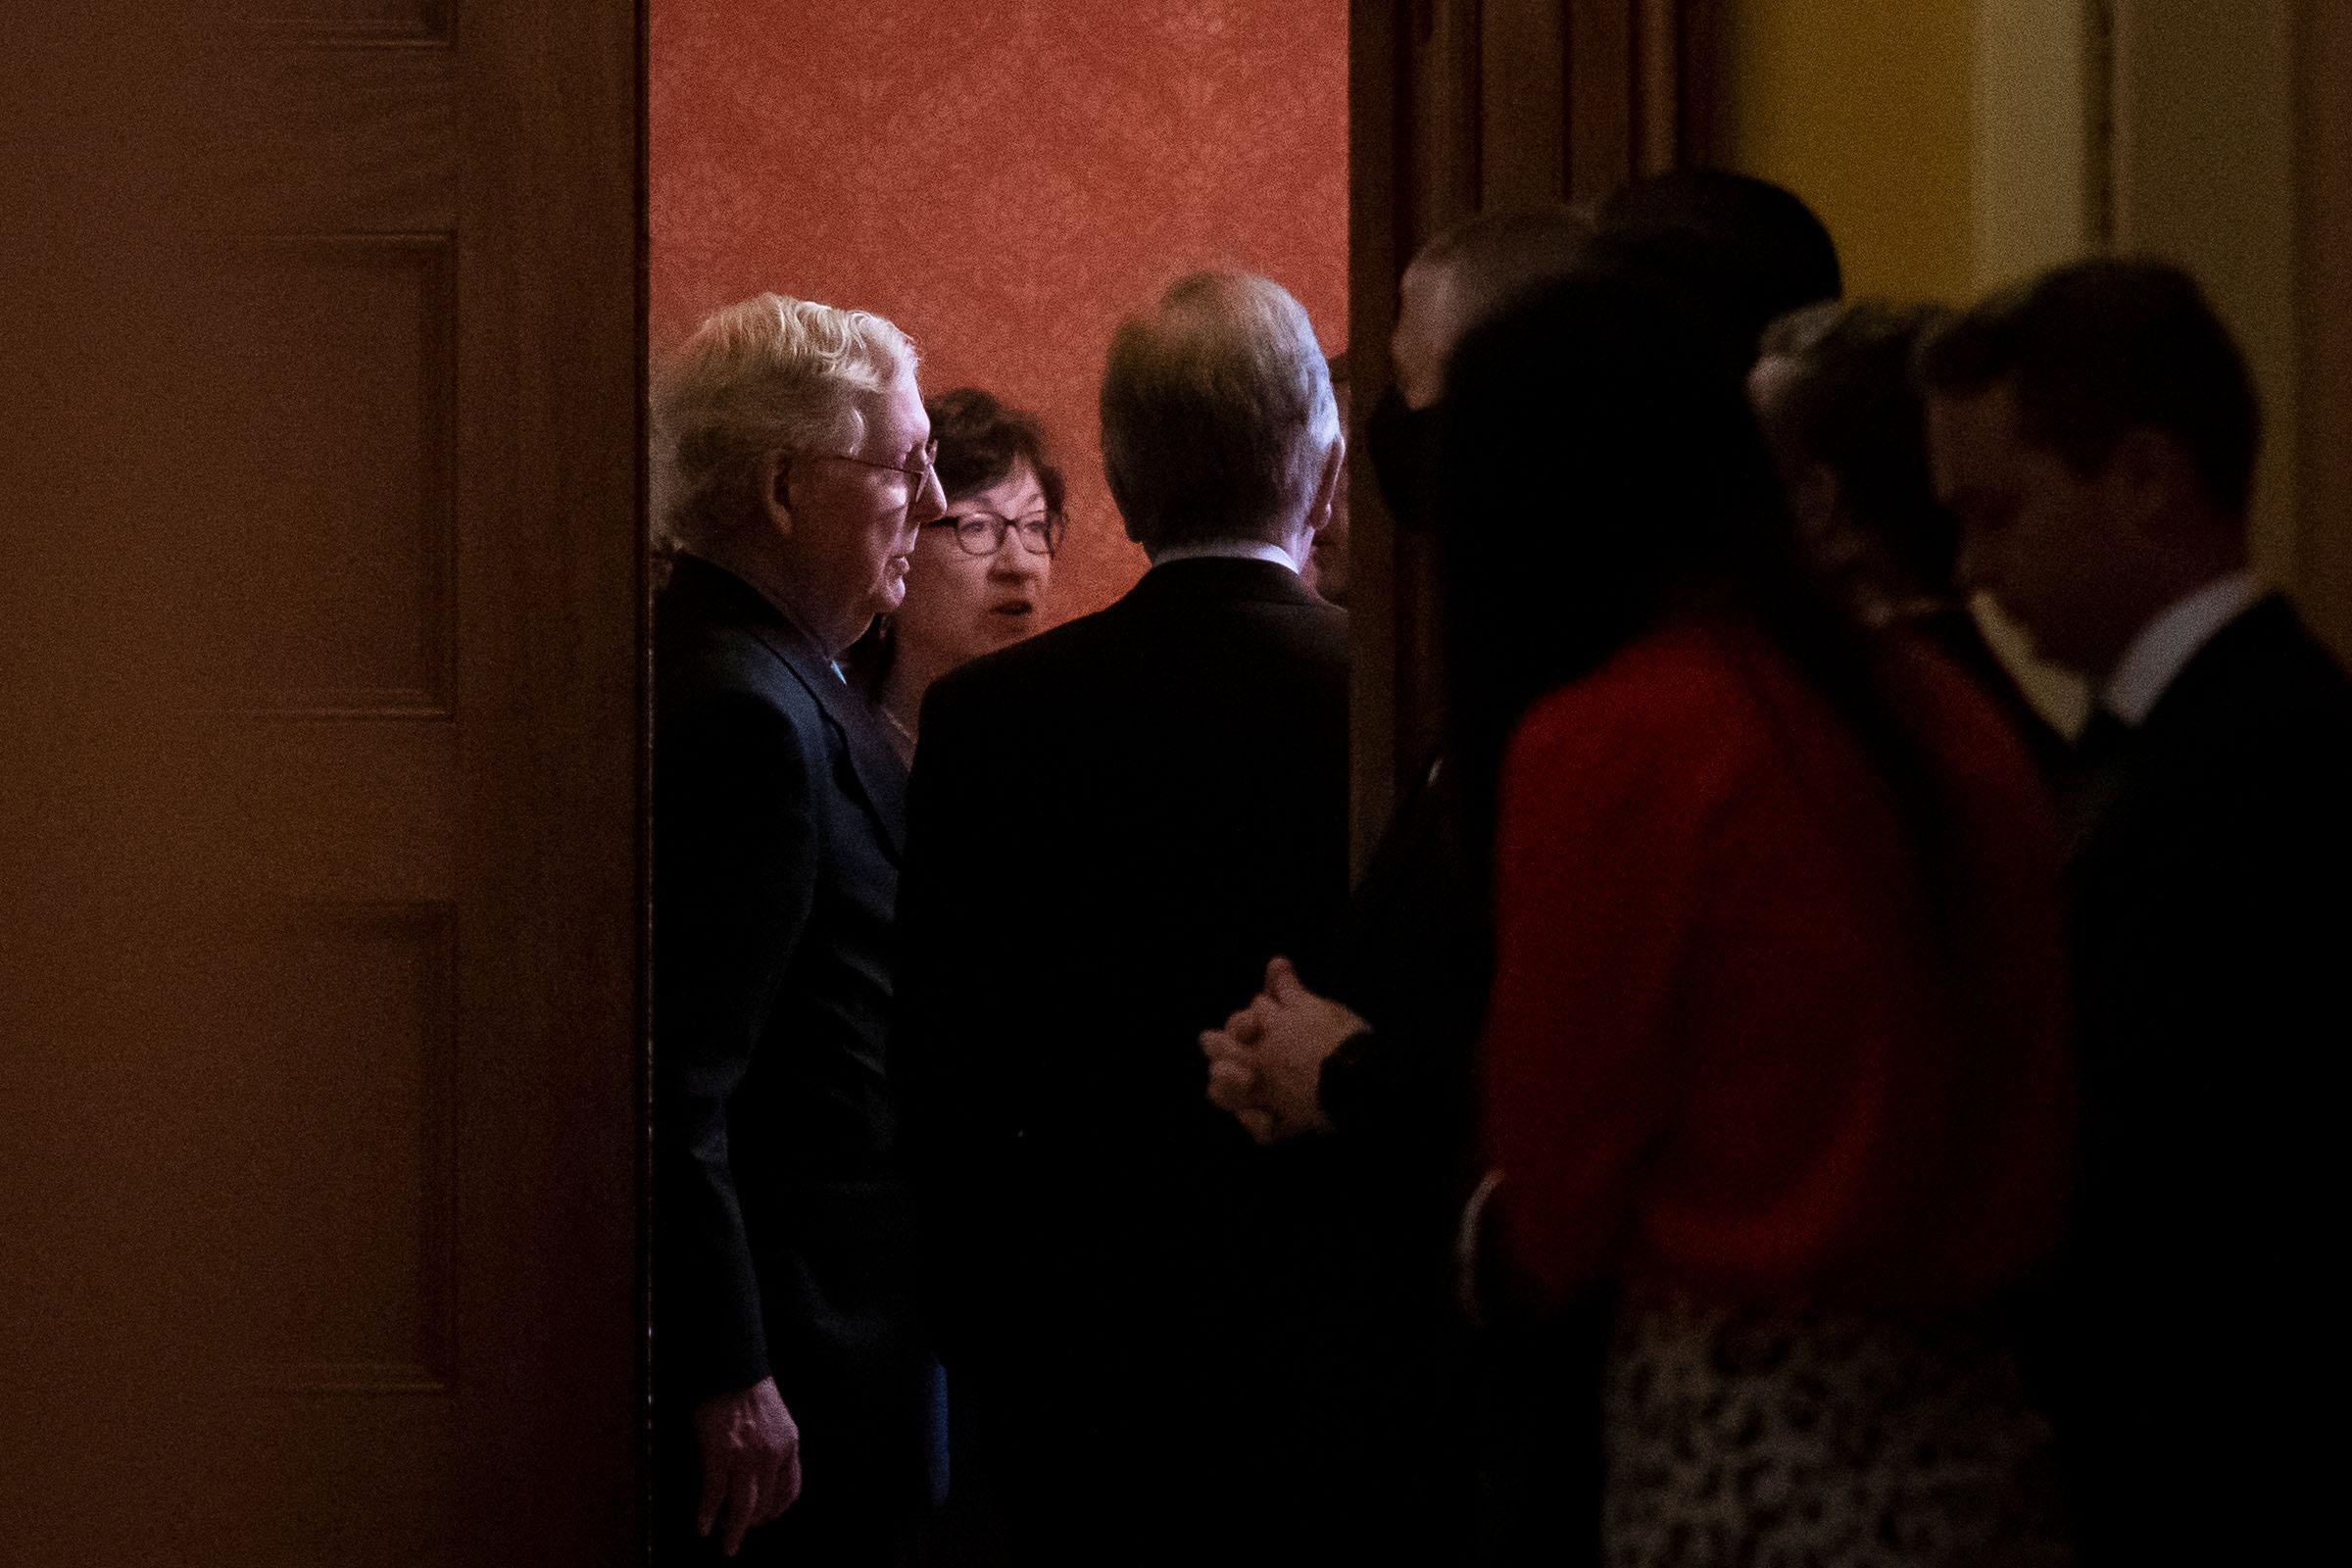 PHOTO: Senate Minority Leader Mitch McConnell, Sen. Susan Collins, and Sen. Roy Blunt are seen through a doorway as Senate Republicans meet behind closed doors to discuss the debt ceiling vote at the U.S. Capitol in Washington, D.C., Oct. 7, 2021.